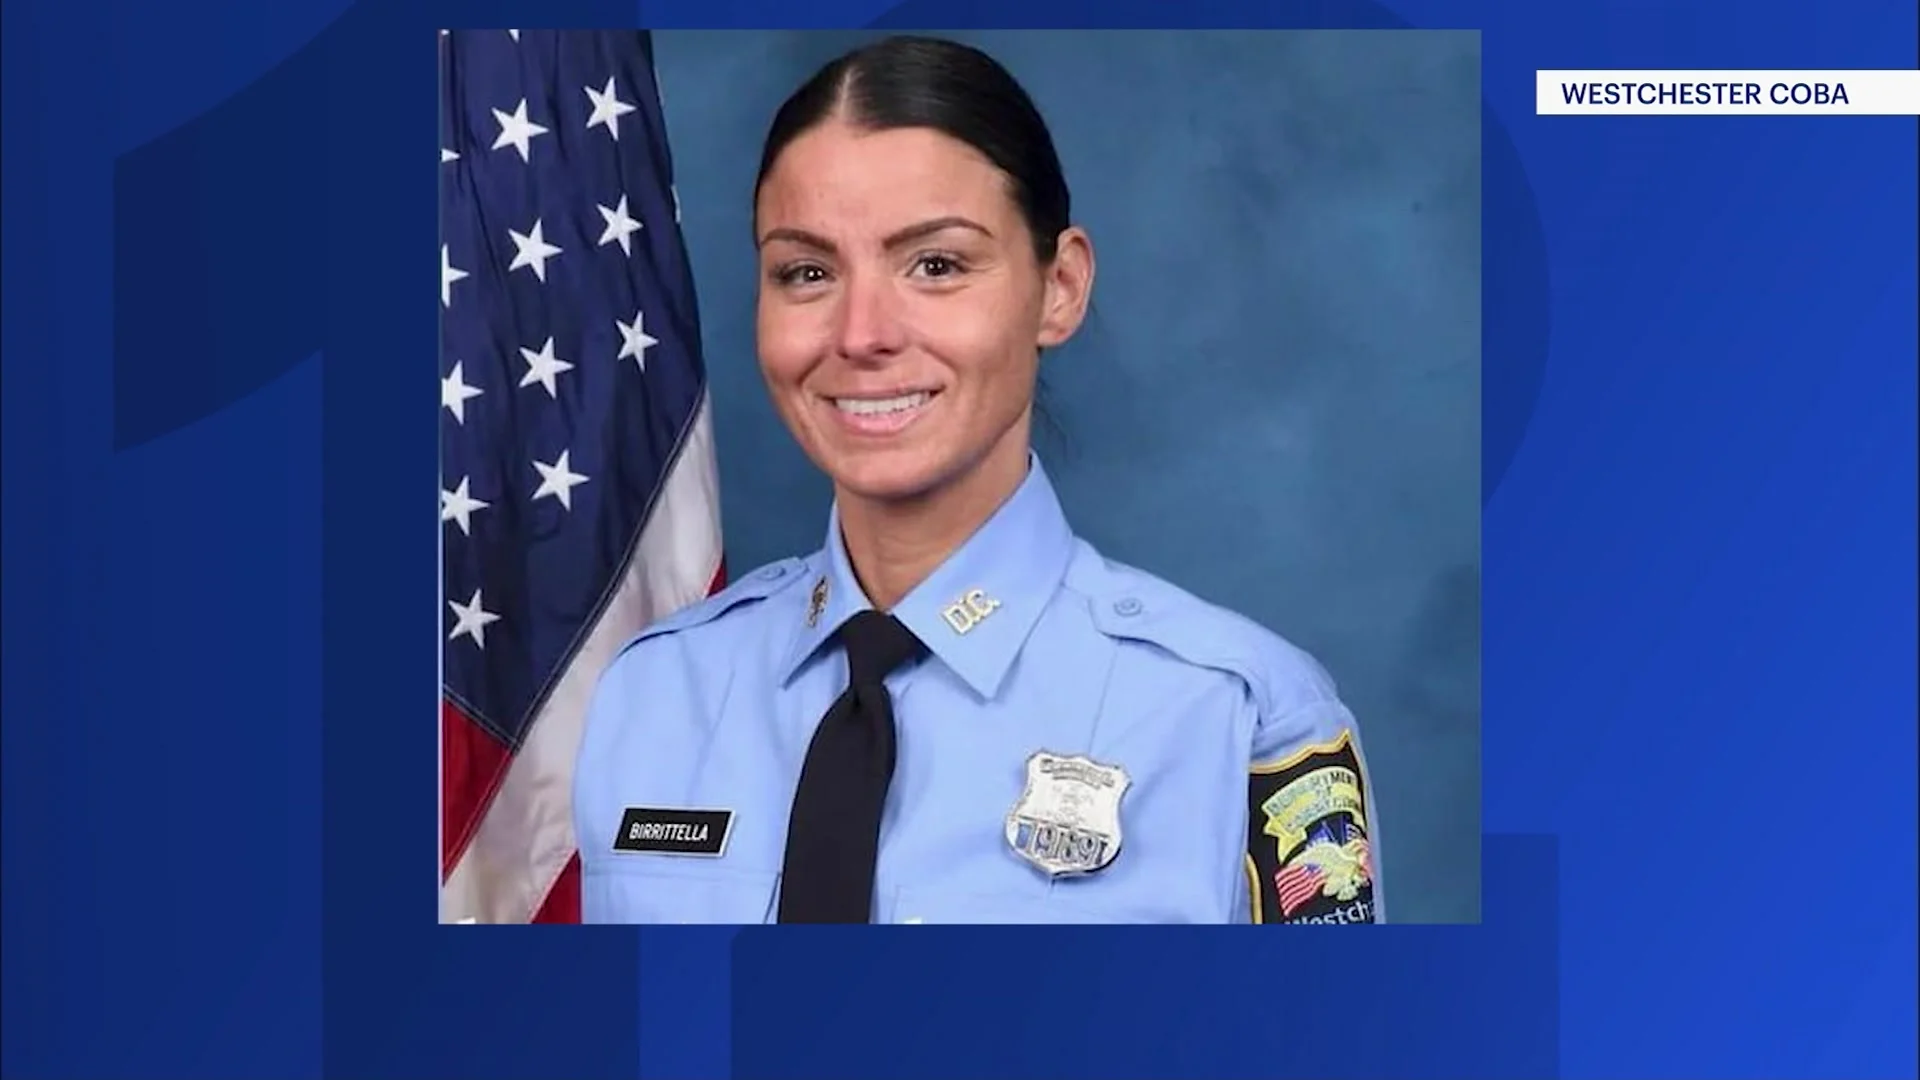 Wake and funeral announced for Westchester correction officer killed in crash